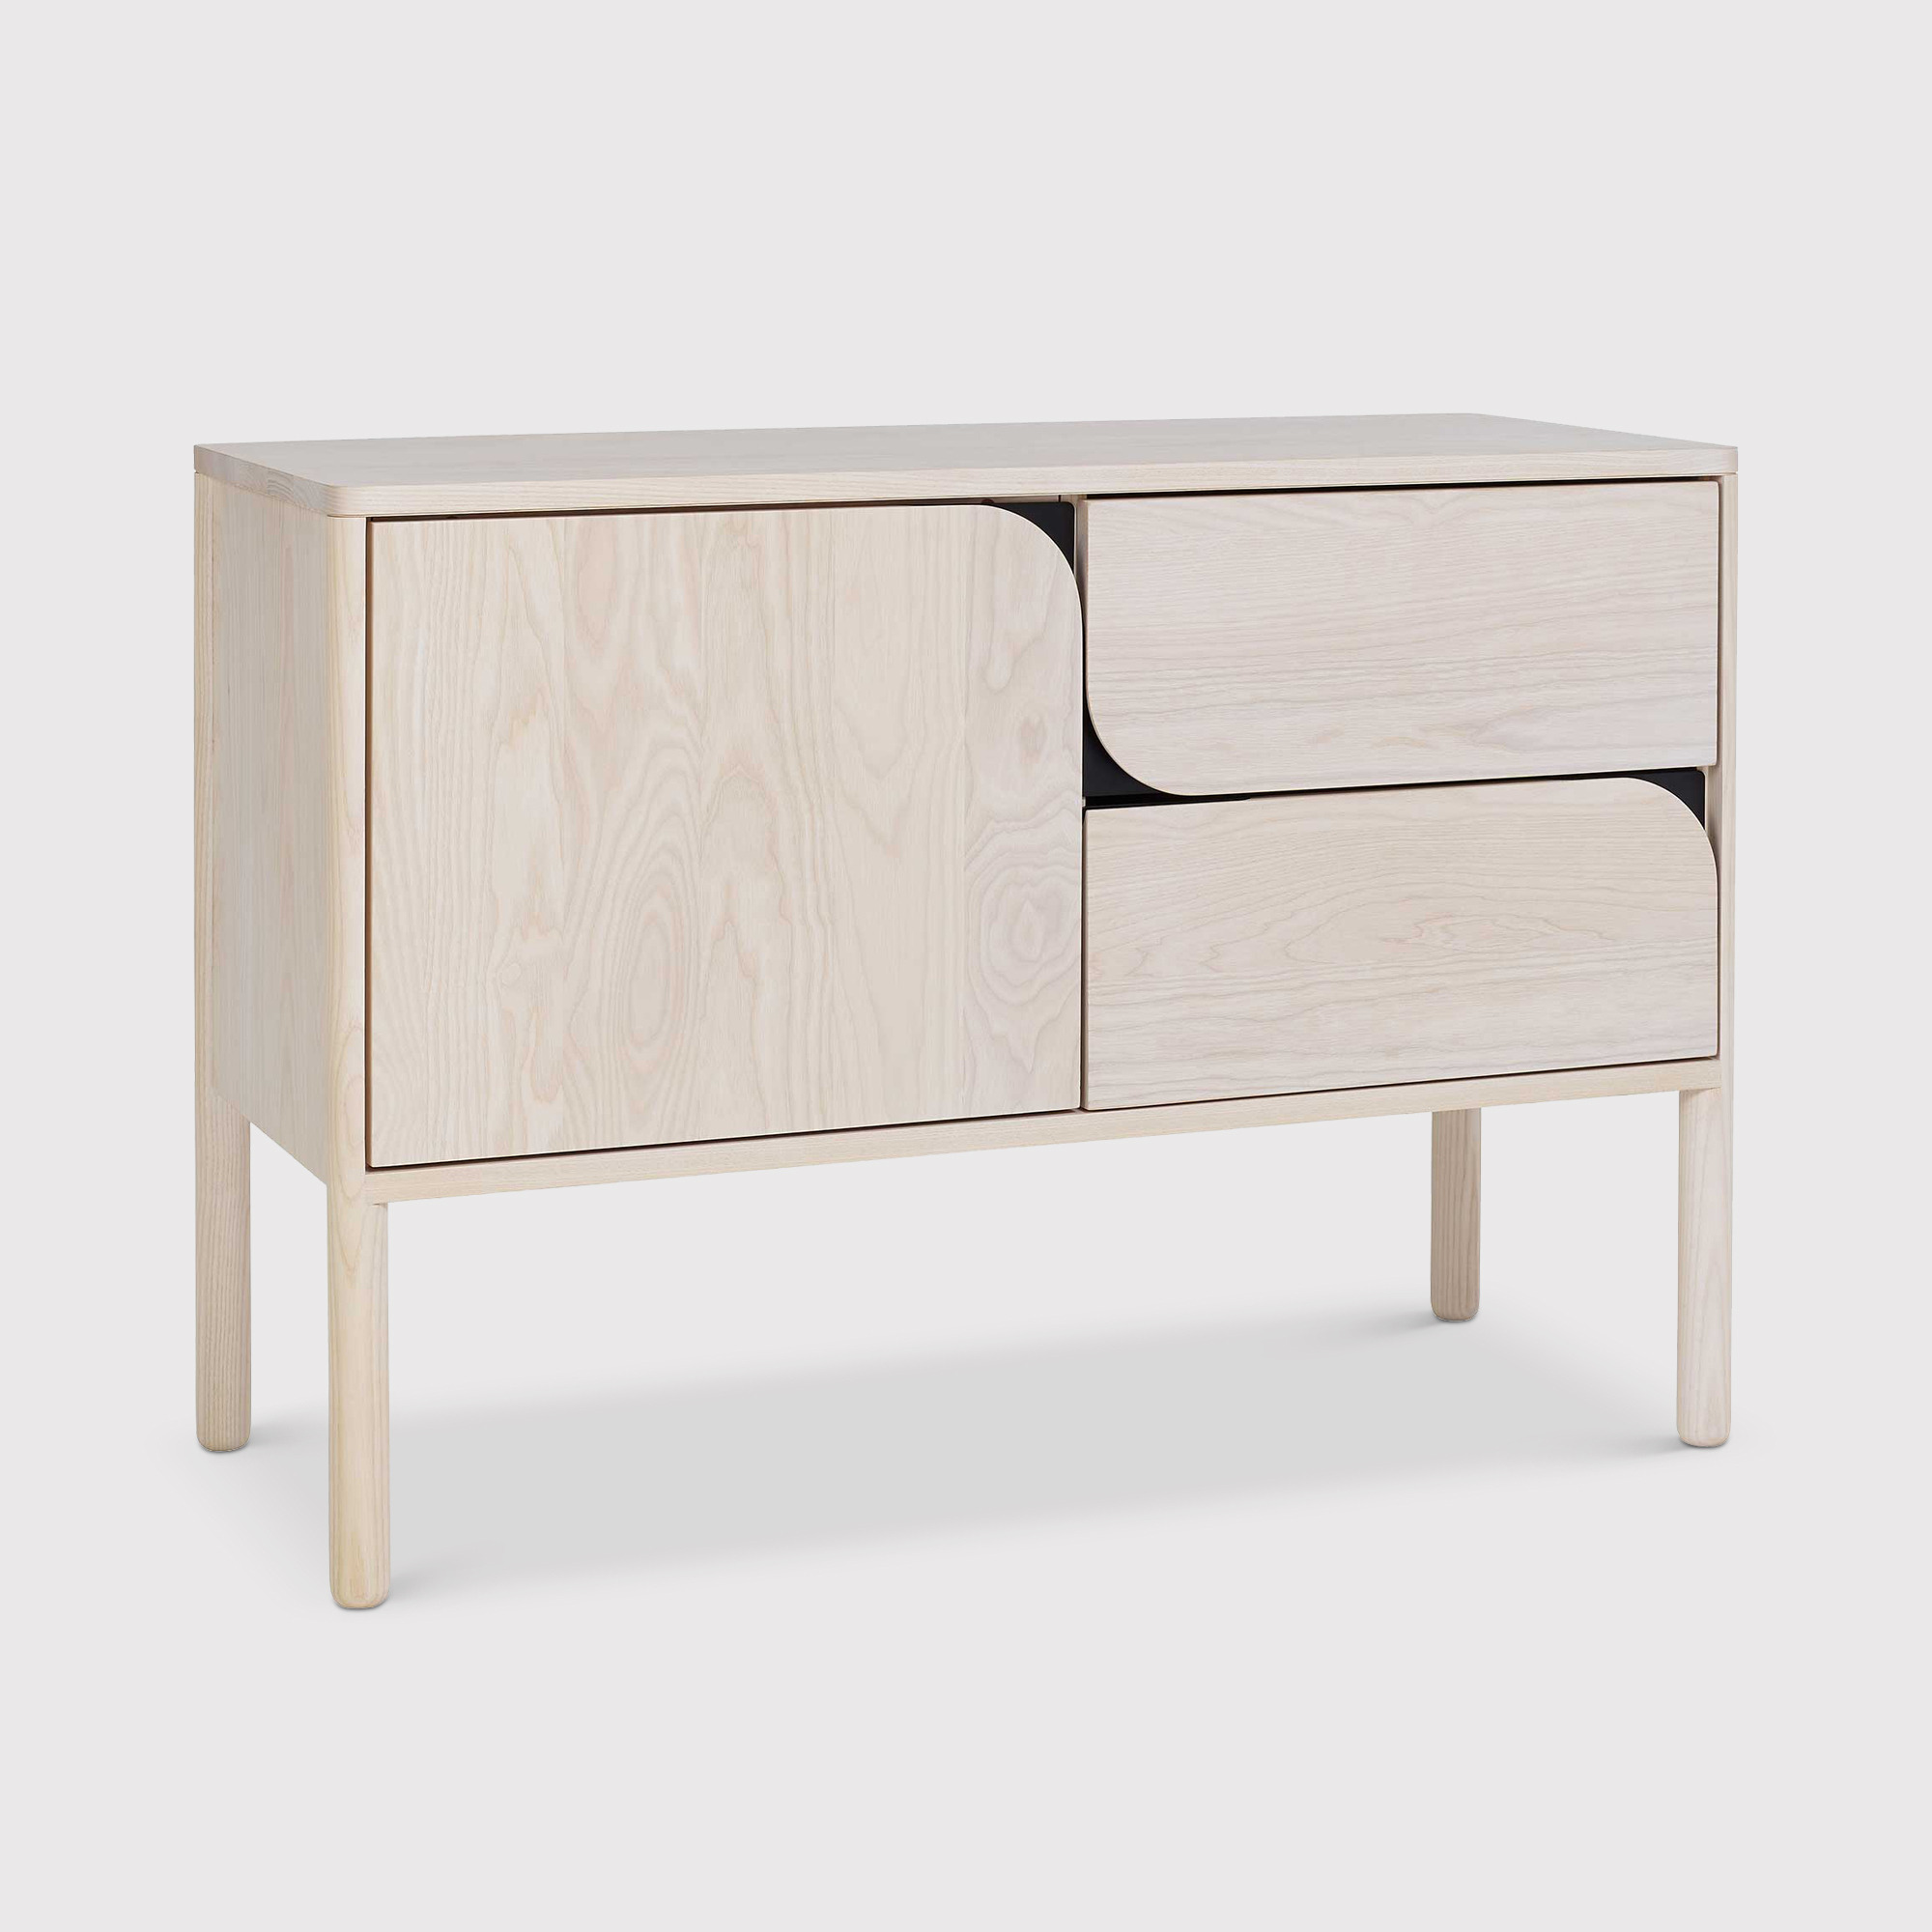 Ercol Verso Small Sideboard, Neutral Wood - Barker & Stonehouse - image 1